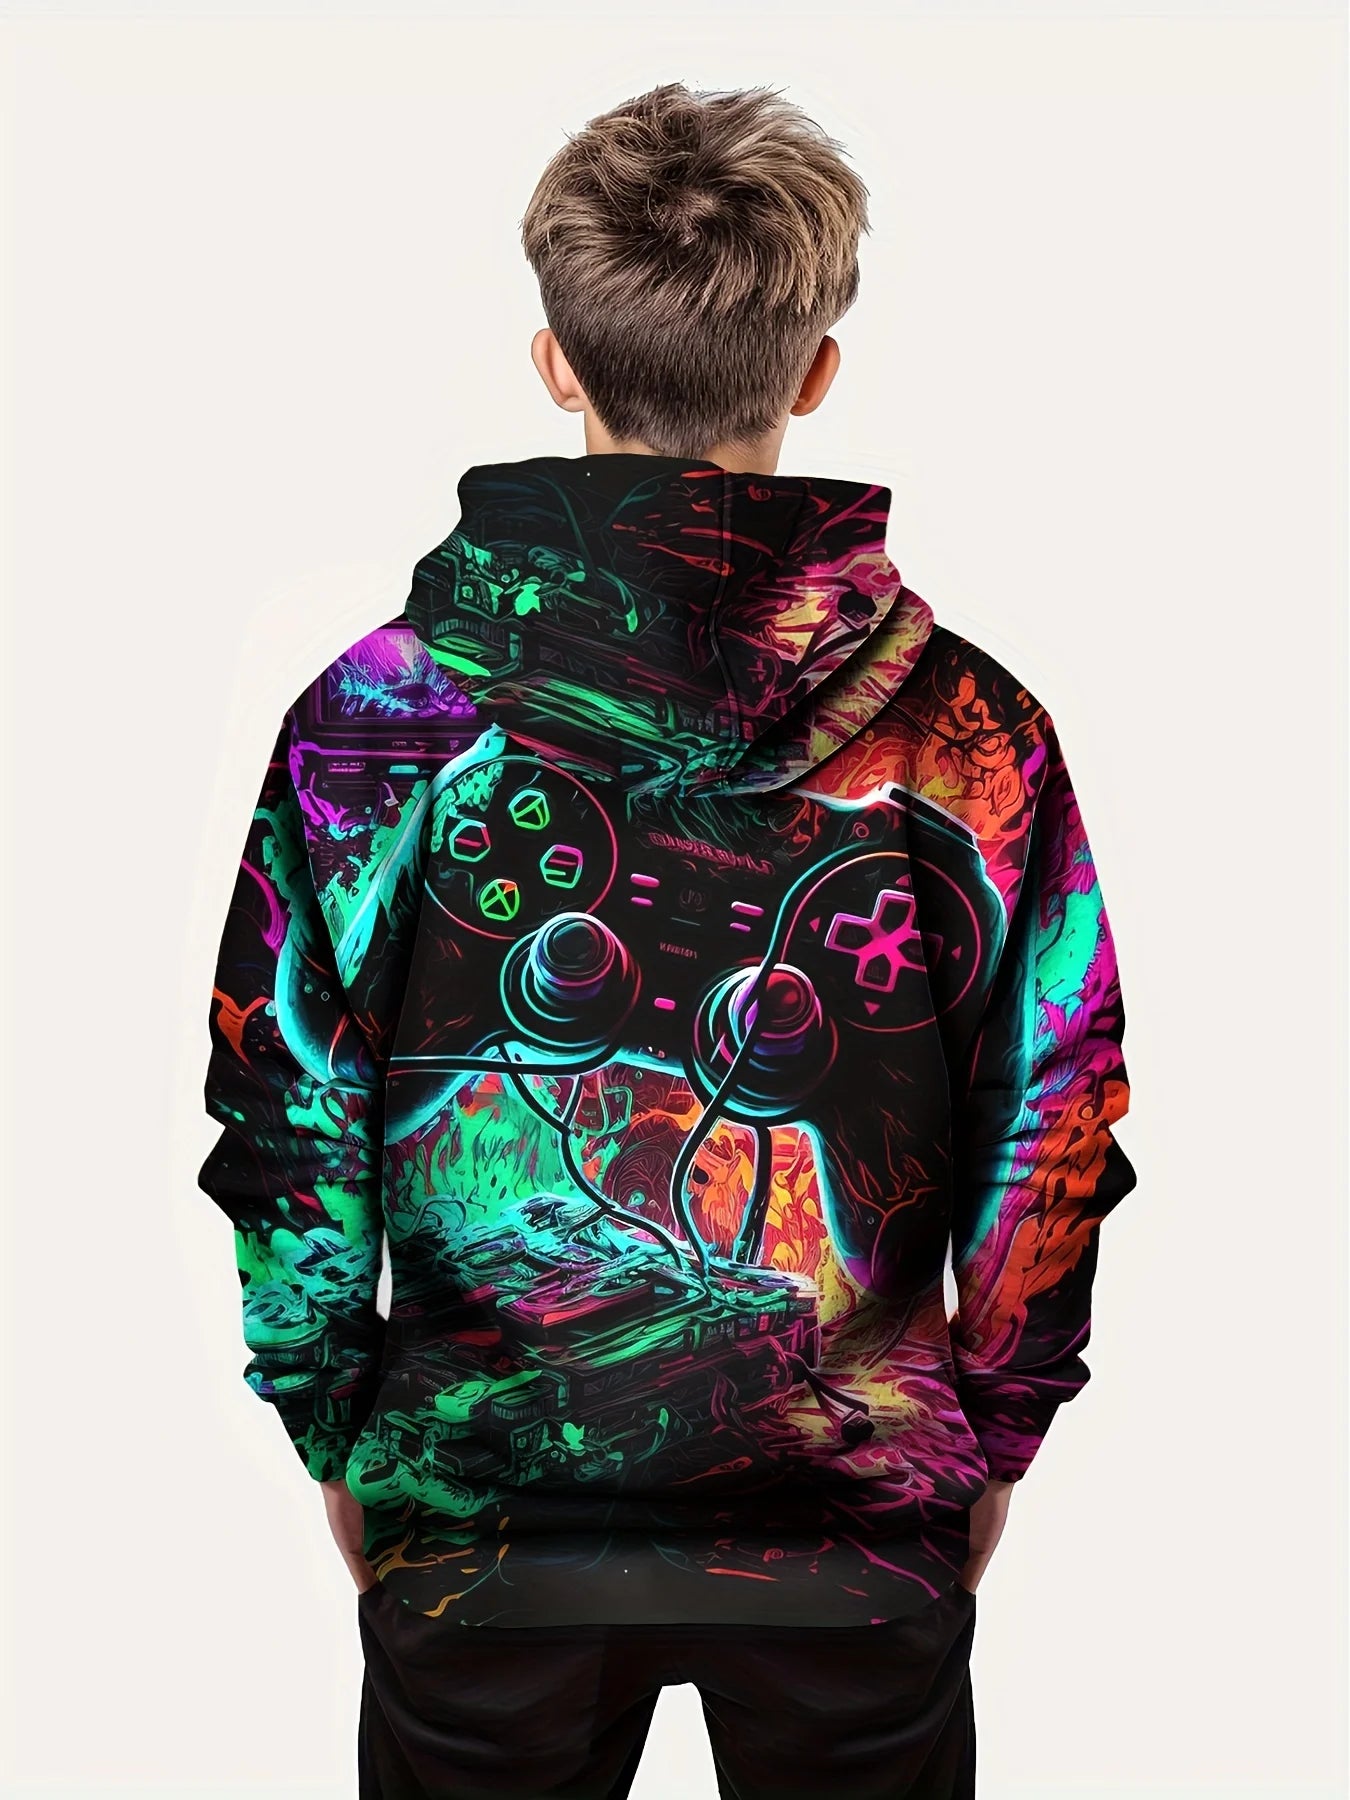 Fashion Colorful Gamepad 3d Print Cute&cozy Hoodie For Kids Boys Keep Him Warm And Stylish Child Hooded Pullover Tops Clothing